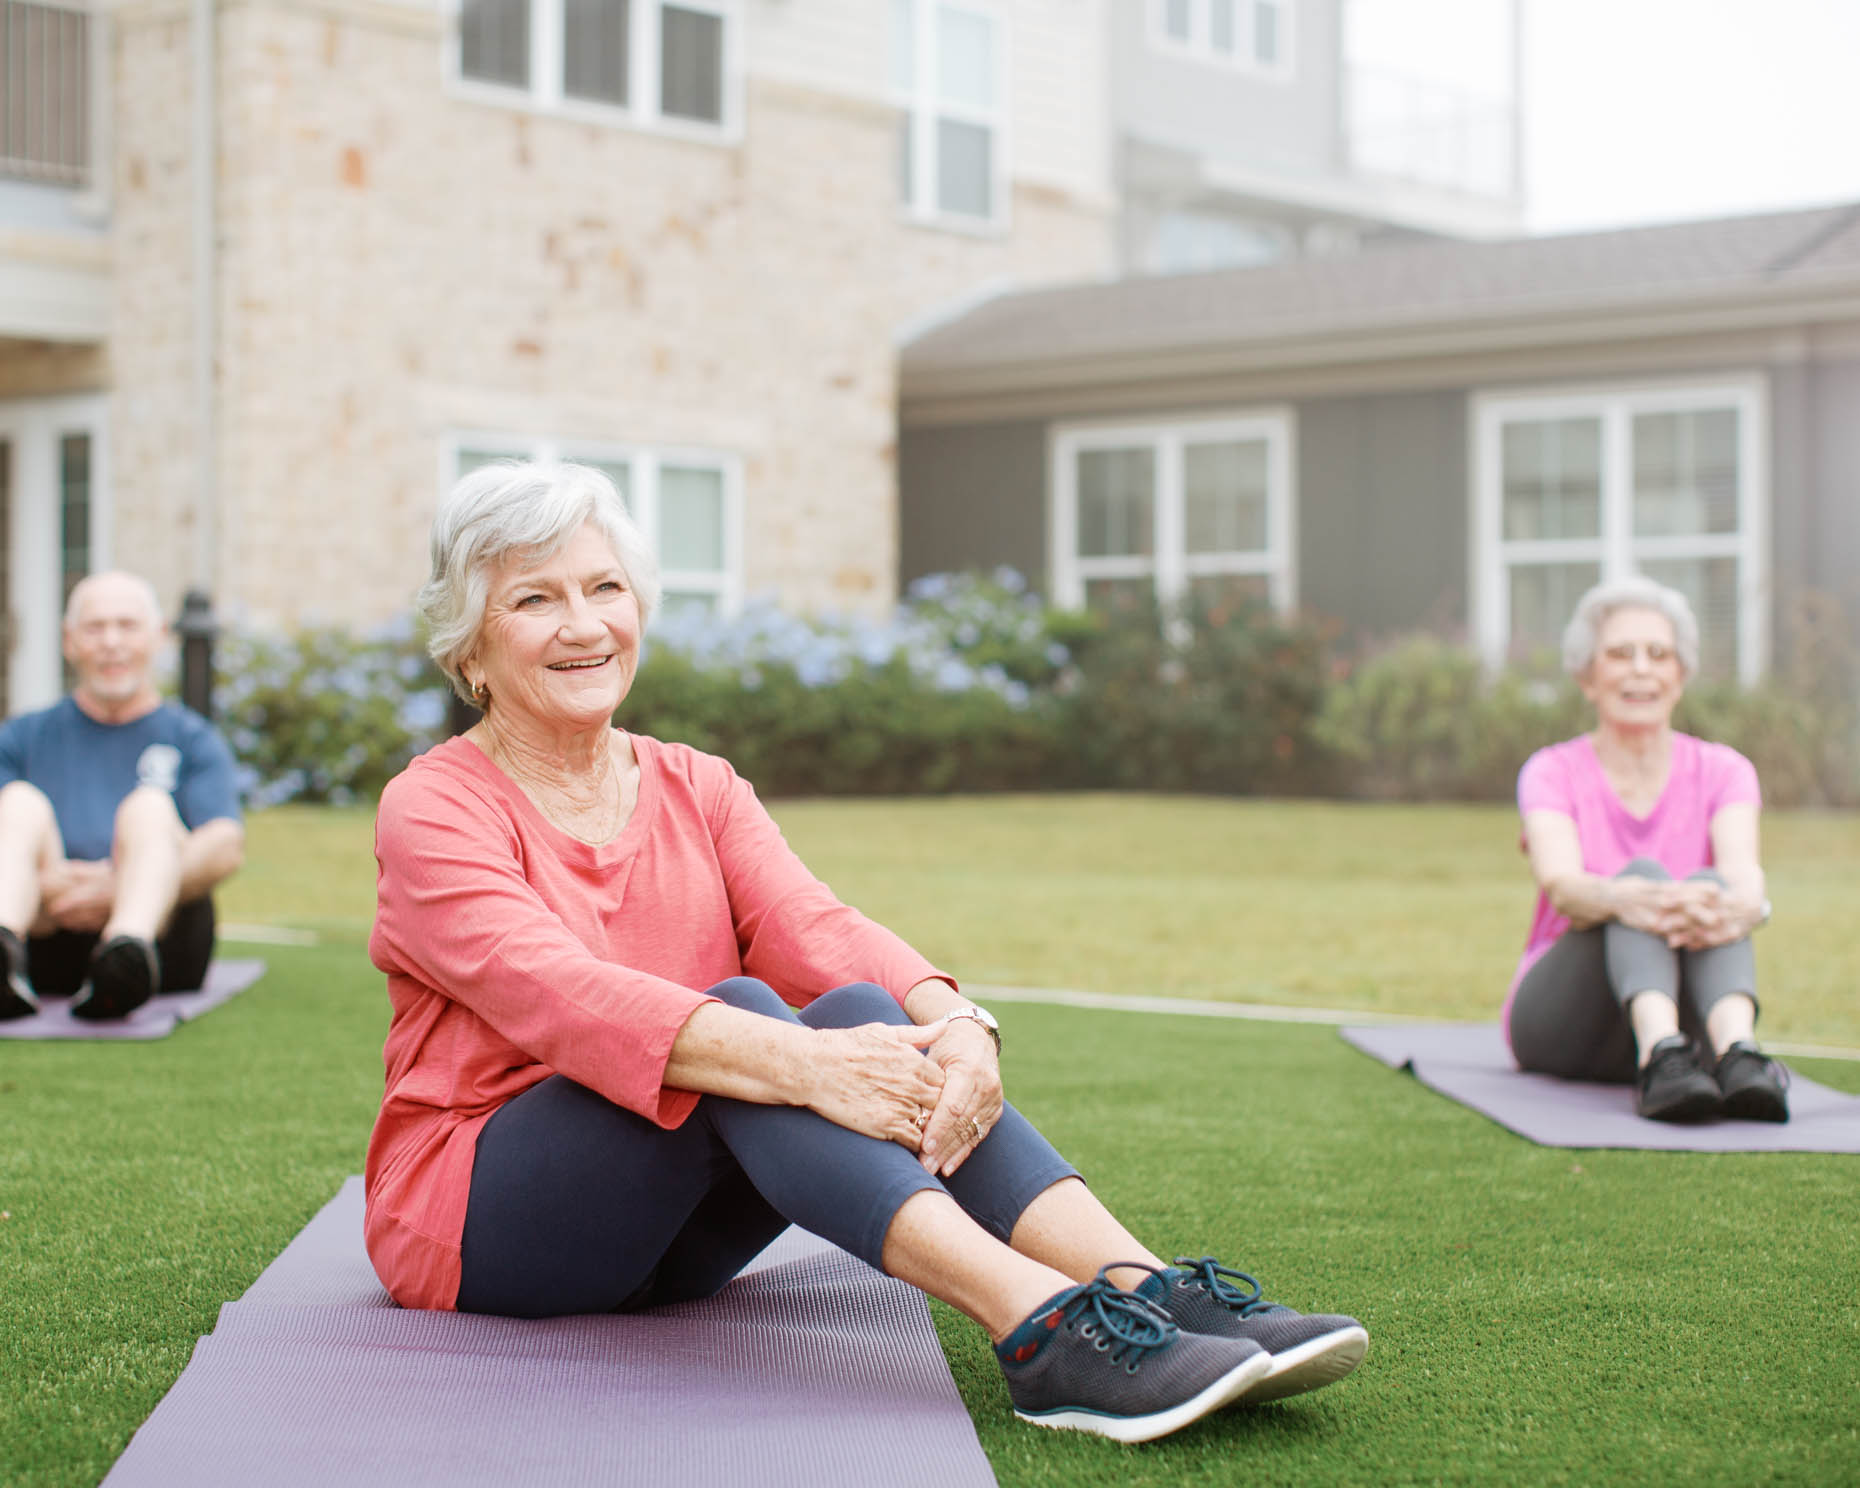 Outdoor fitness yoga class at a senior living retirement community